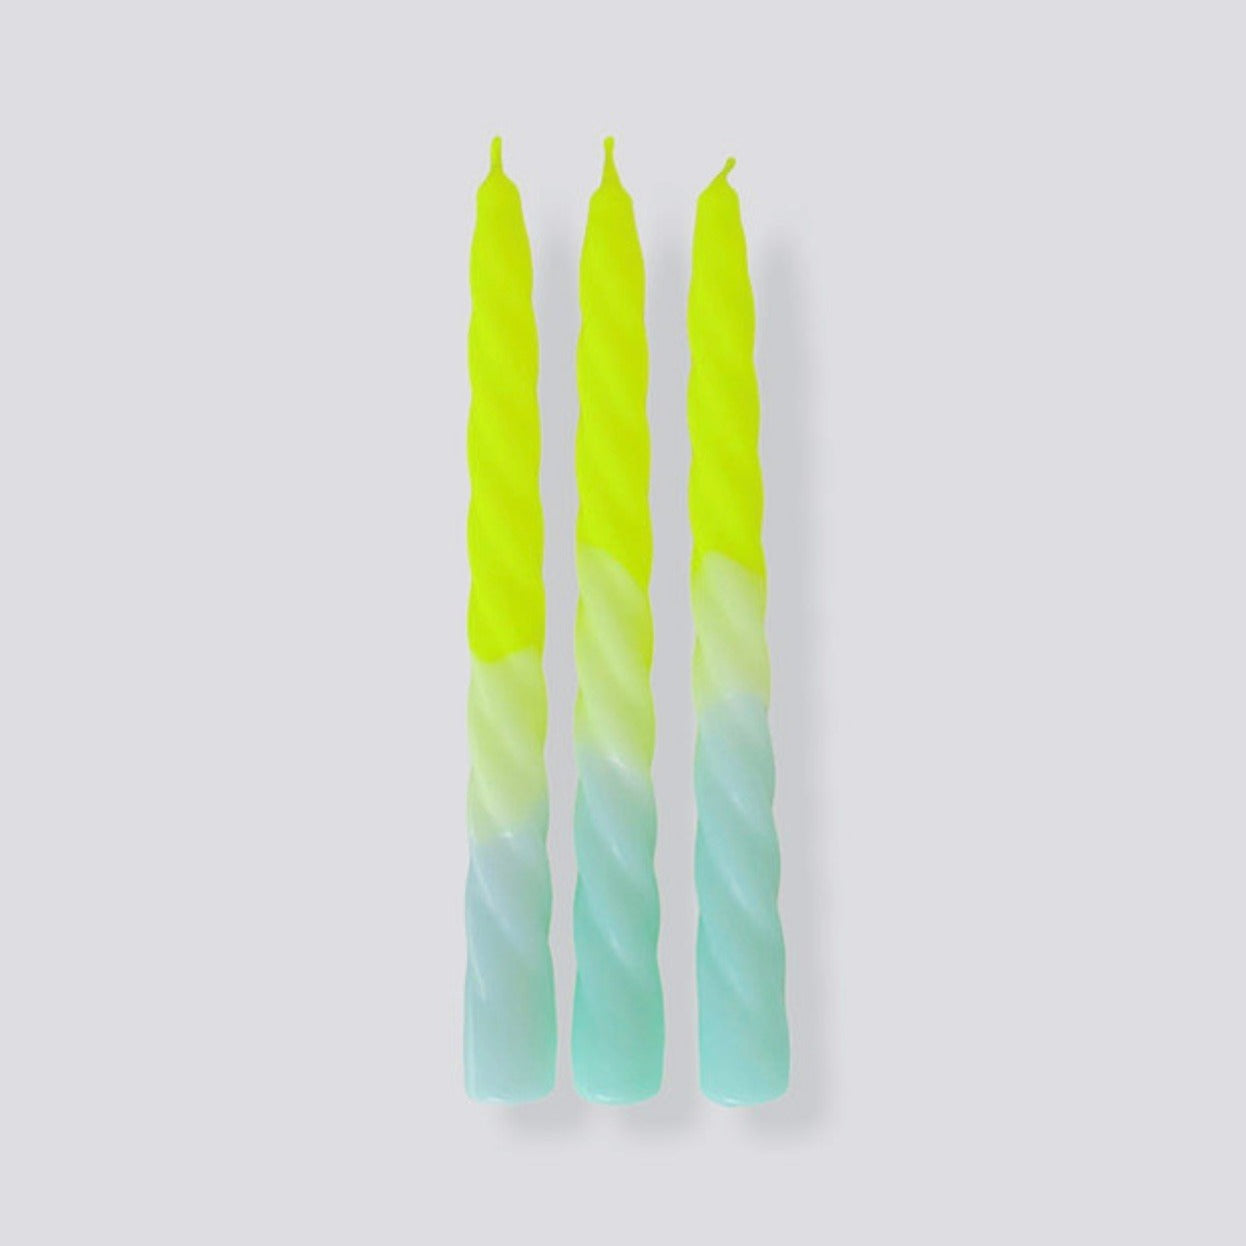 pink stories set of 3 dip dyed candles in yellow and blue